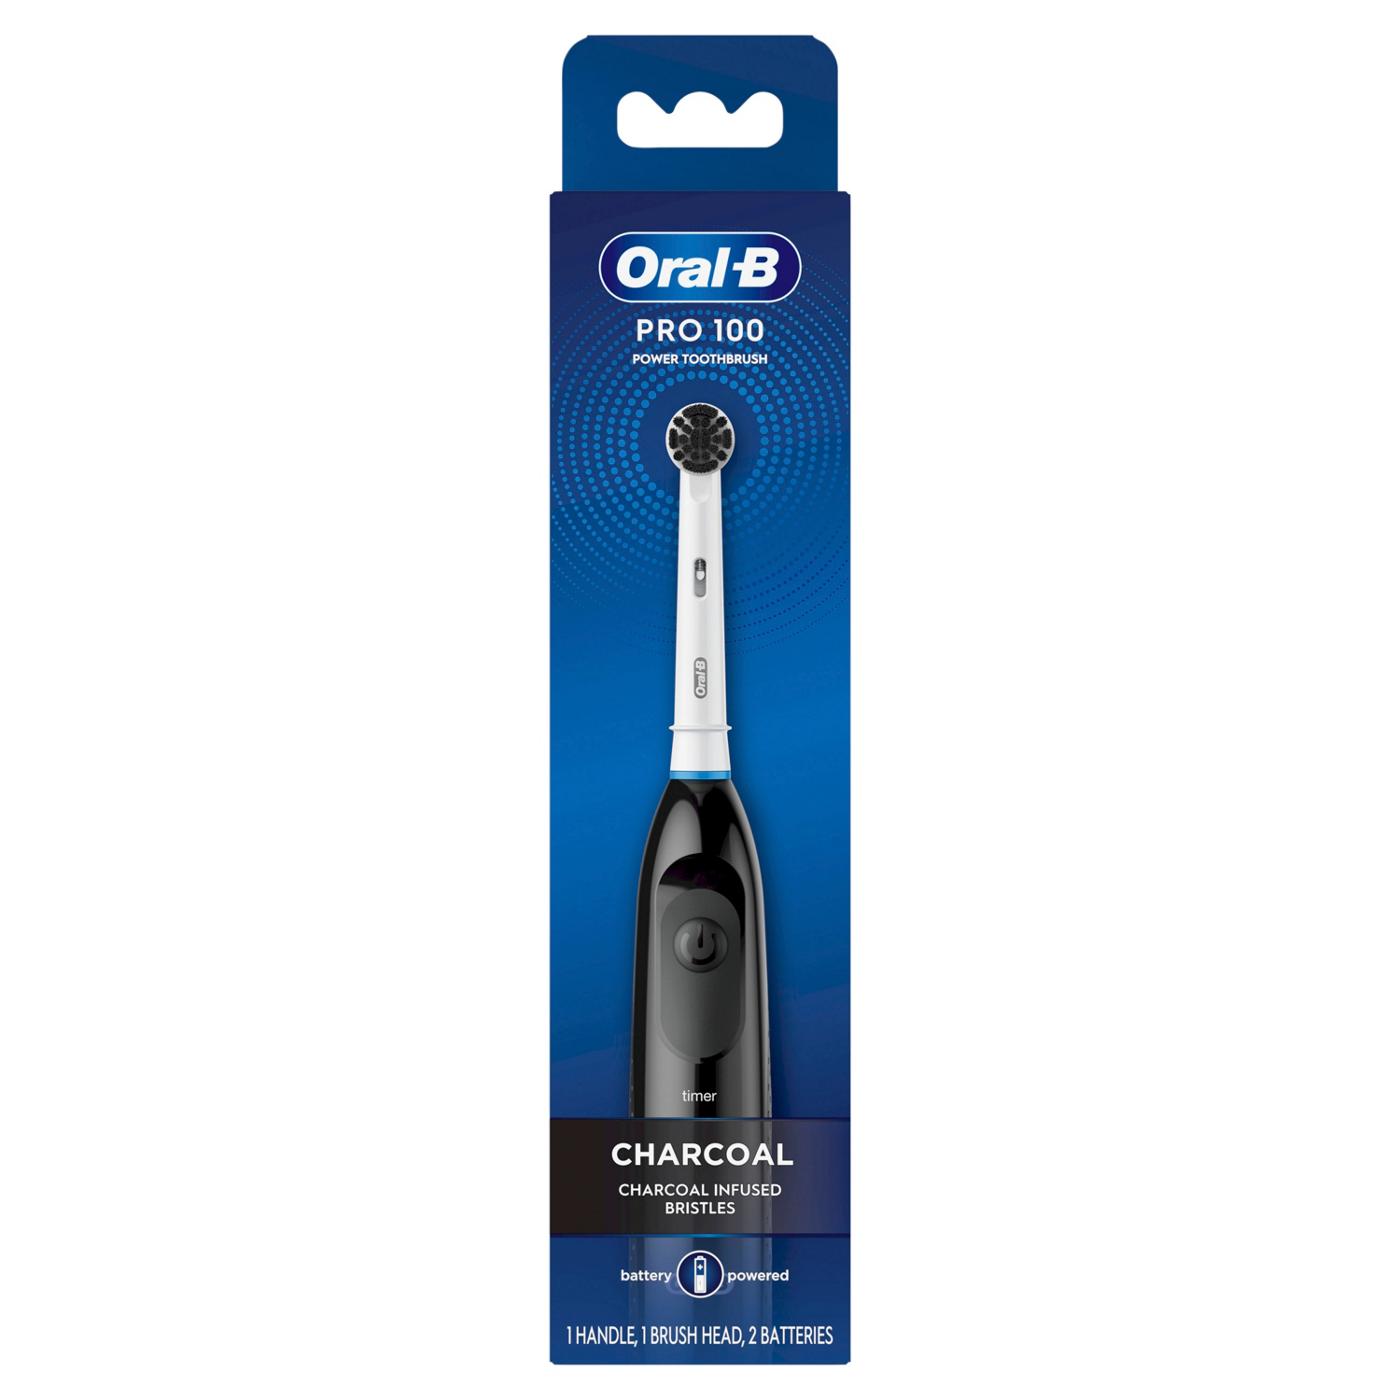 Oral-B Charcoal Clinical Battery Powered Toothbrush; image 1 of 3